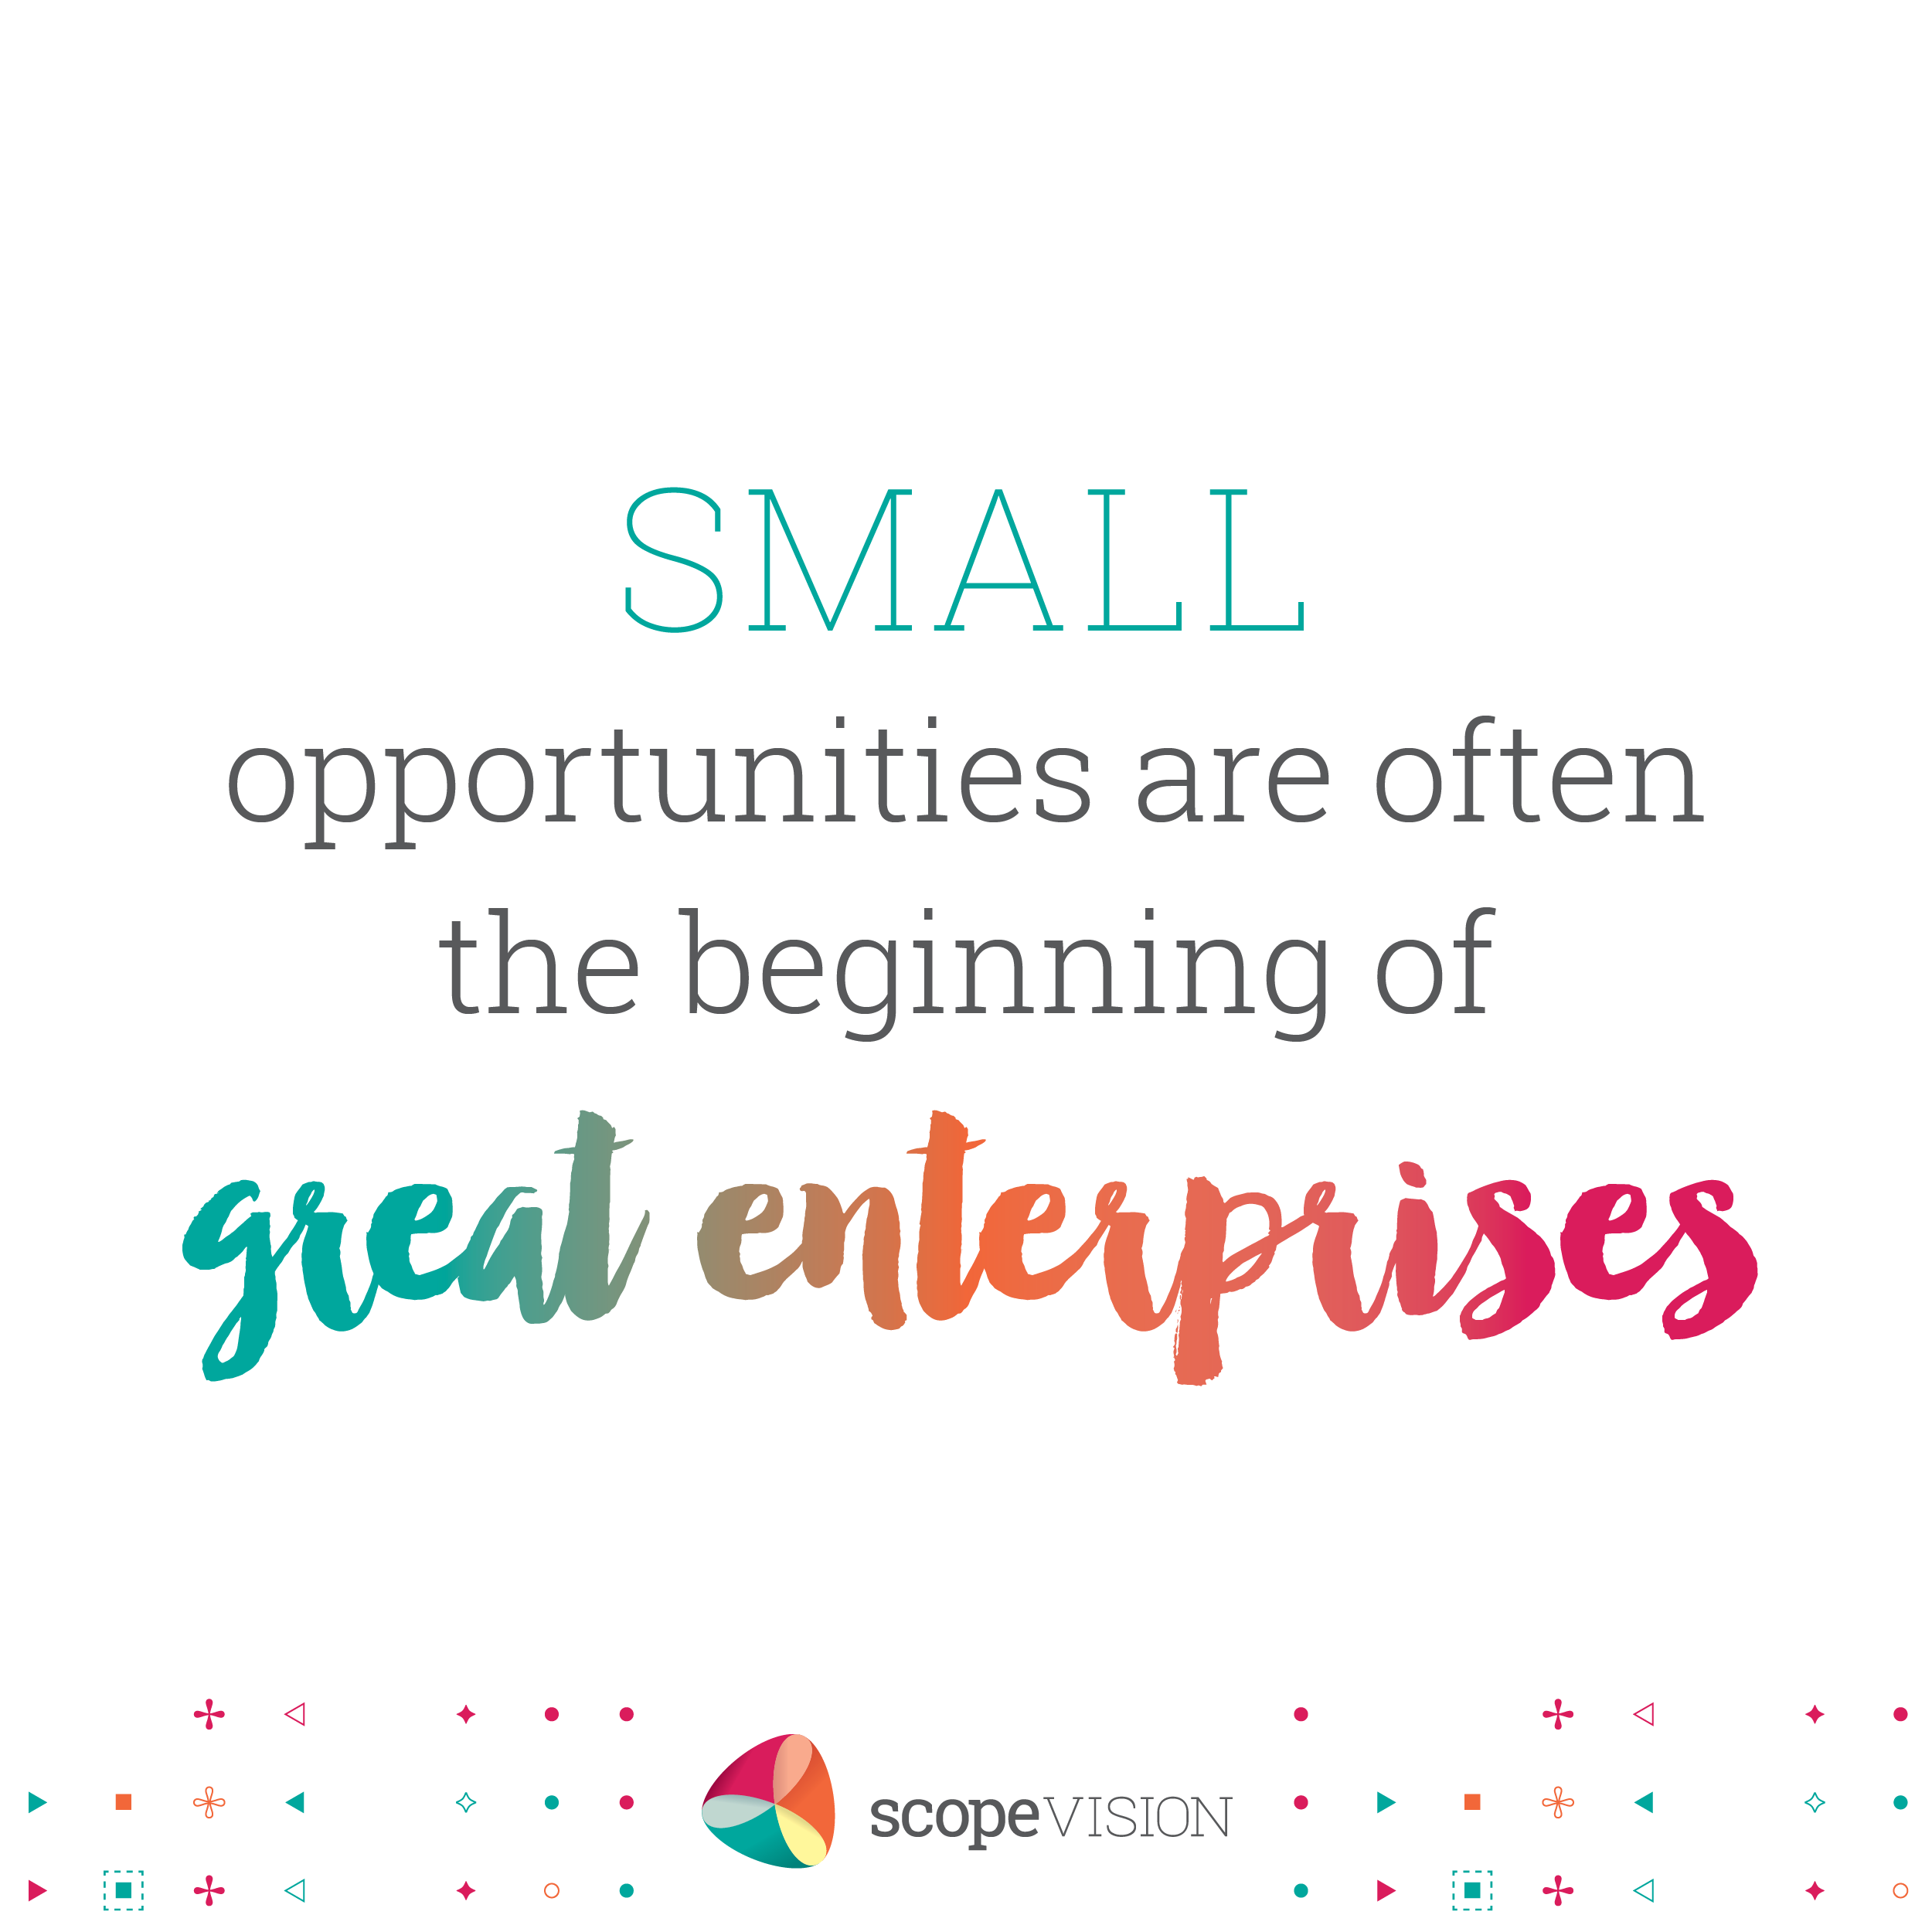 Small opportunities